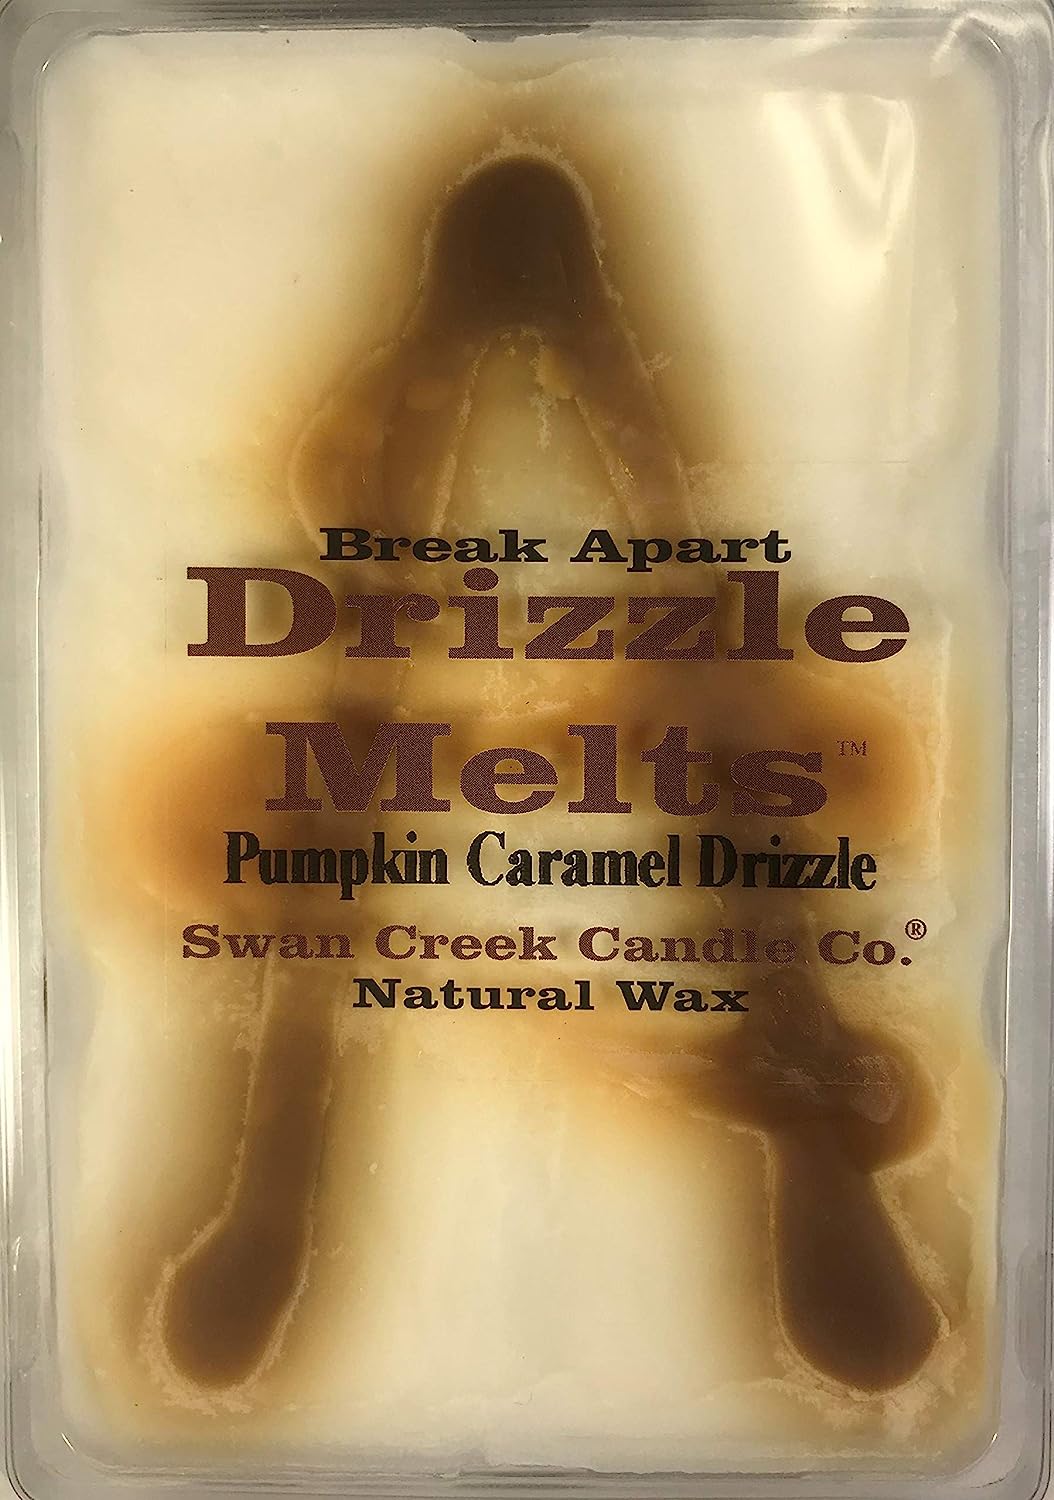 Swan Creek Candle Co. Drizzle Melts